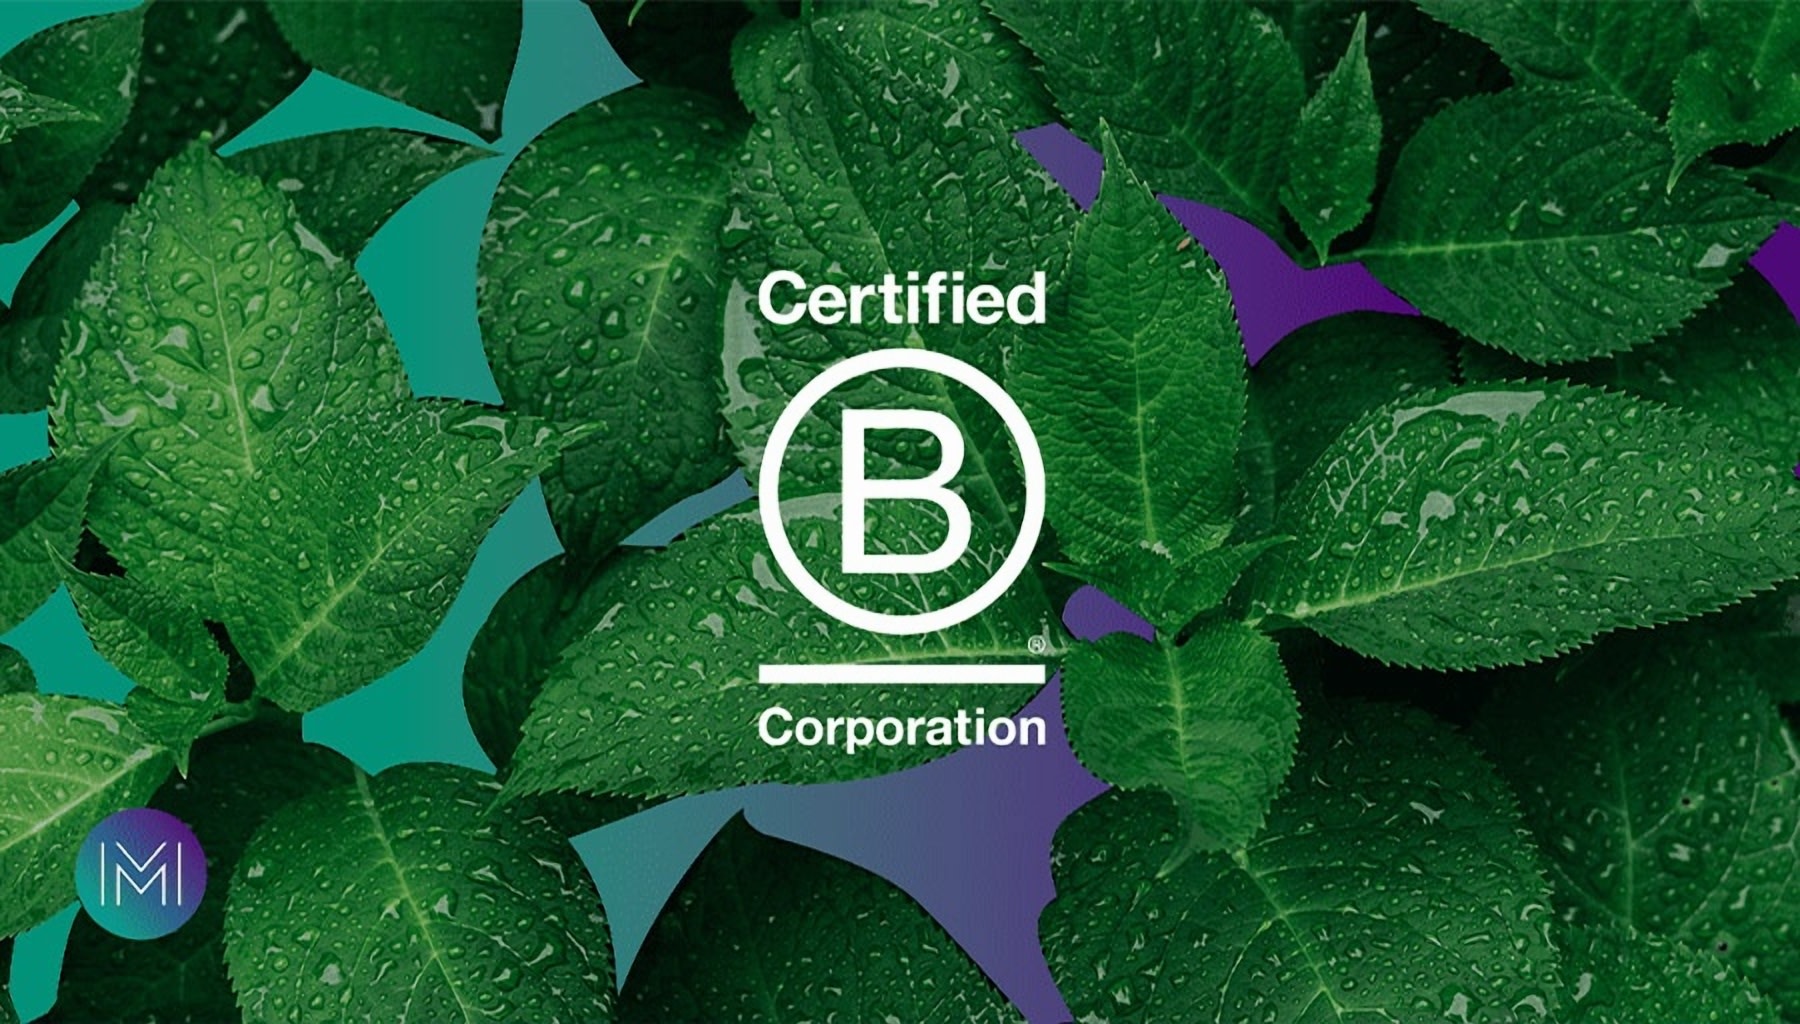 KnowESG_Moorhouse Consulting Joins B Corp Movement